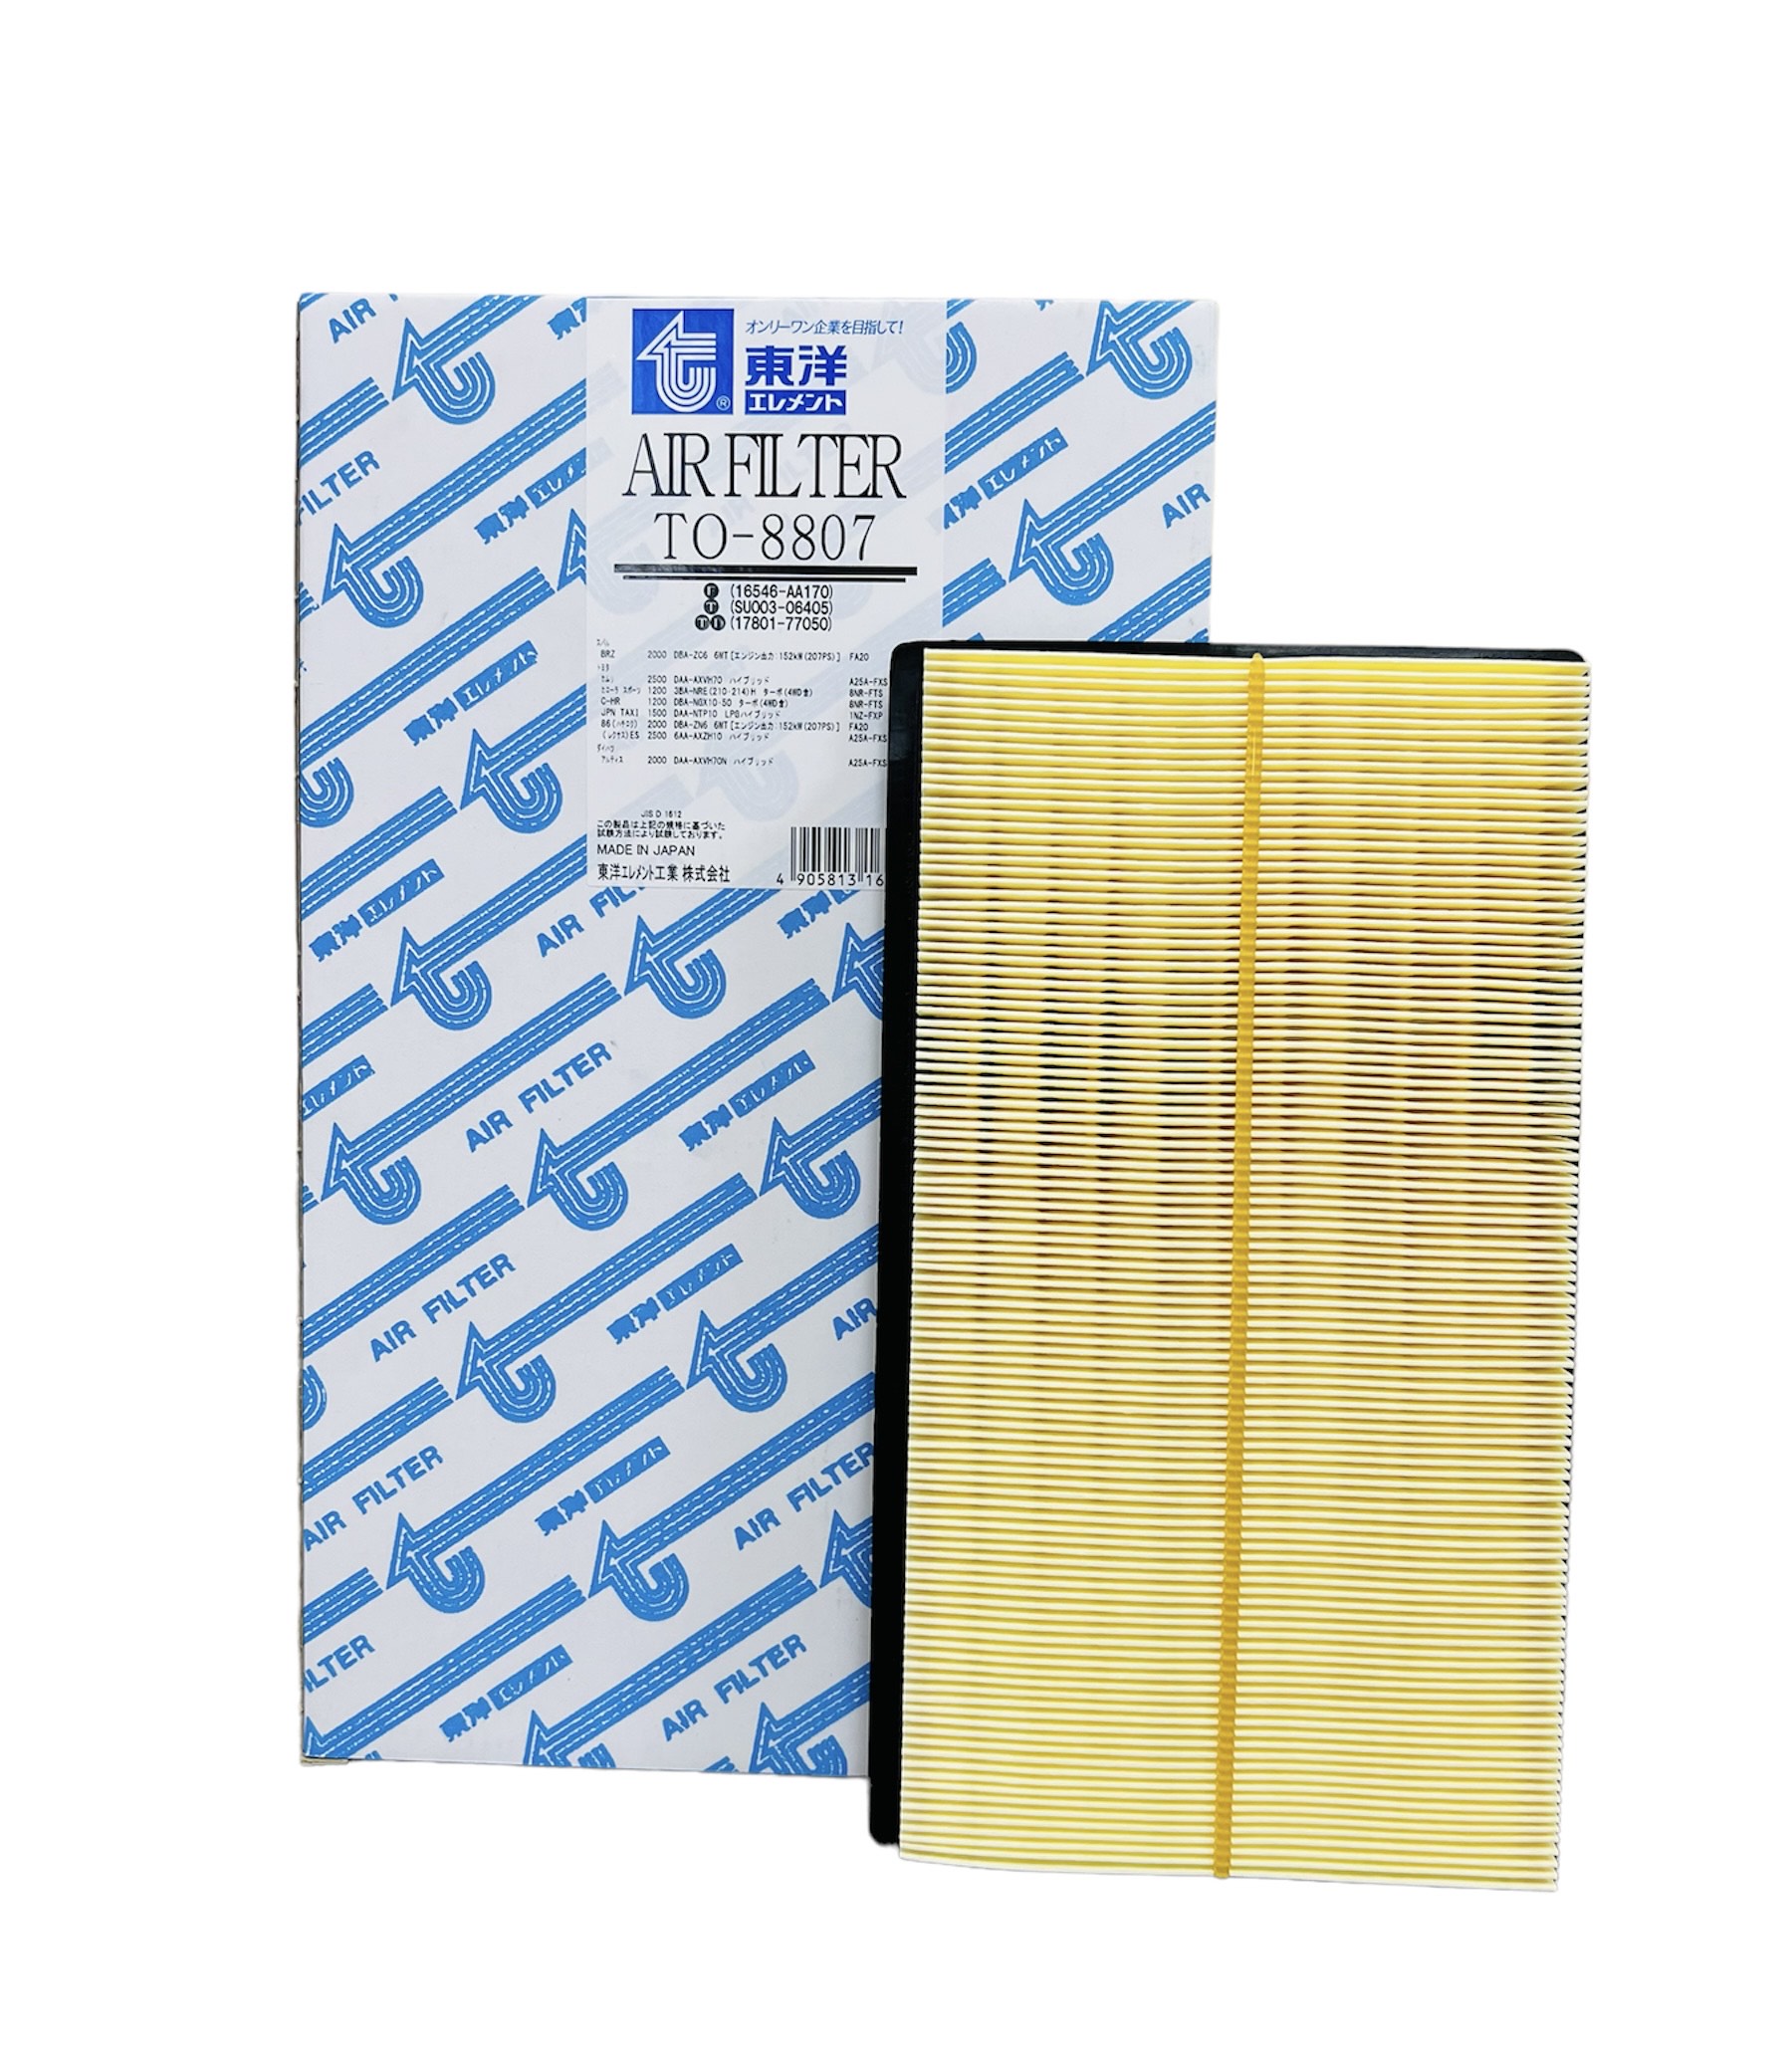  Air Filter TO-8807 F